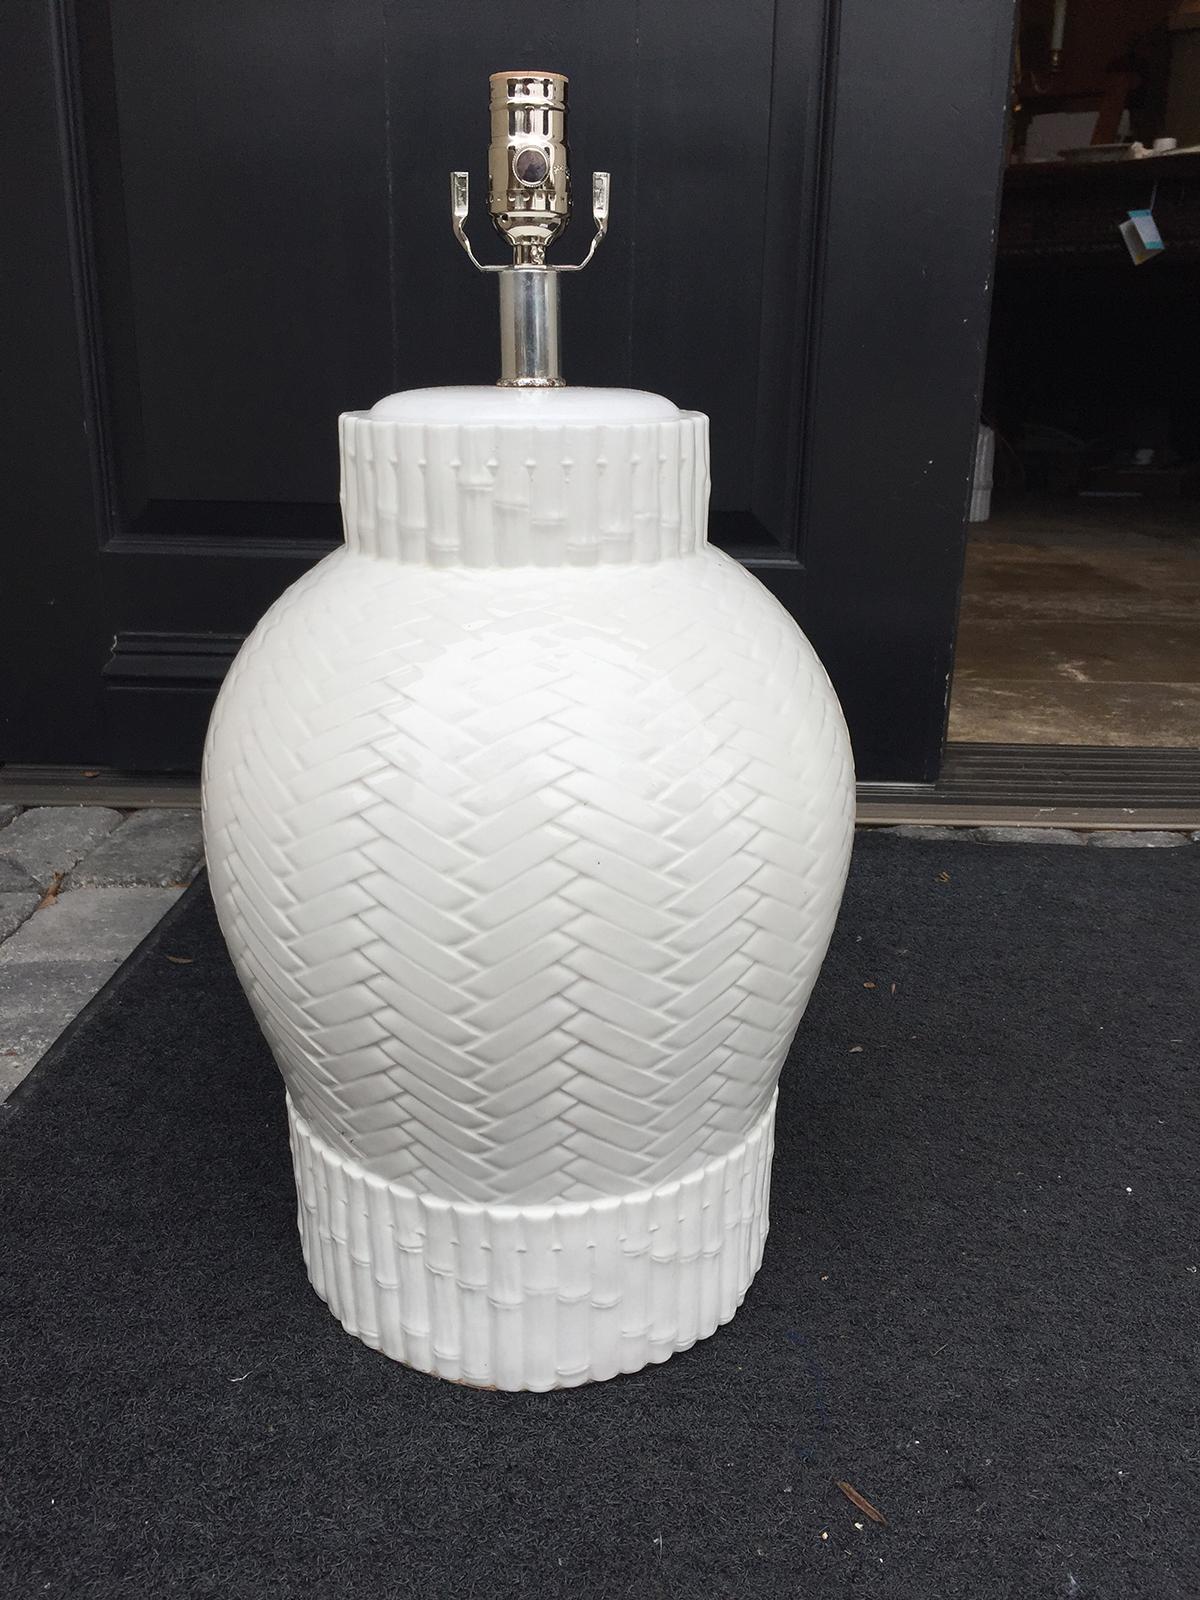 Mid-20th century Italian white faux bamboo porcelain lamp
New wiring.